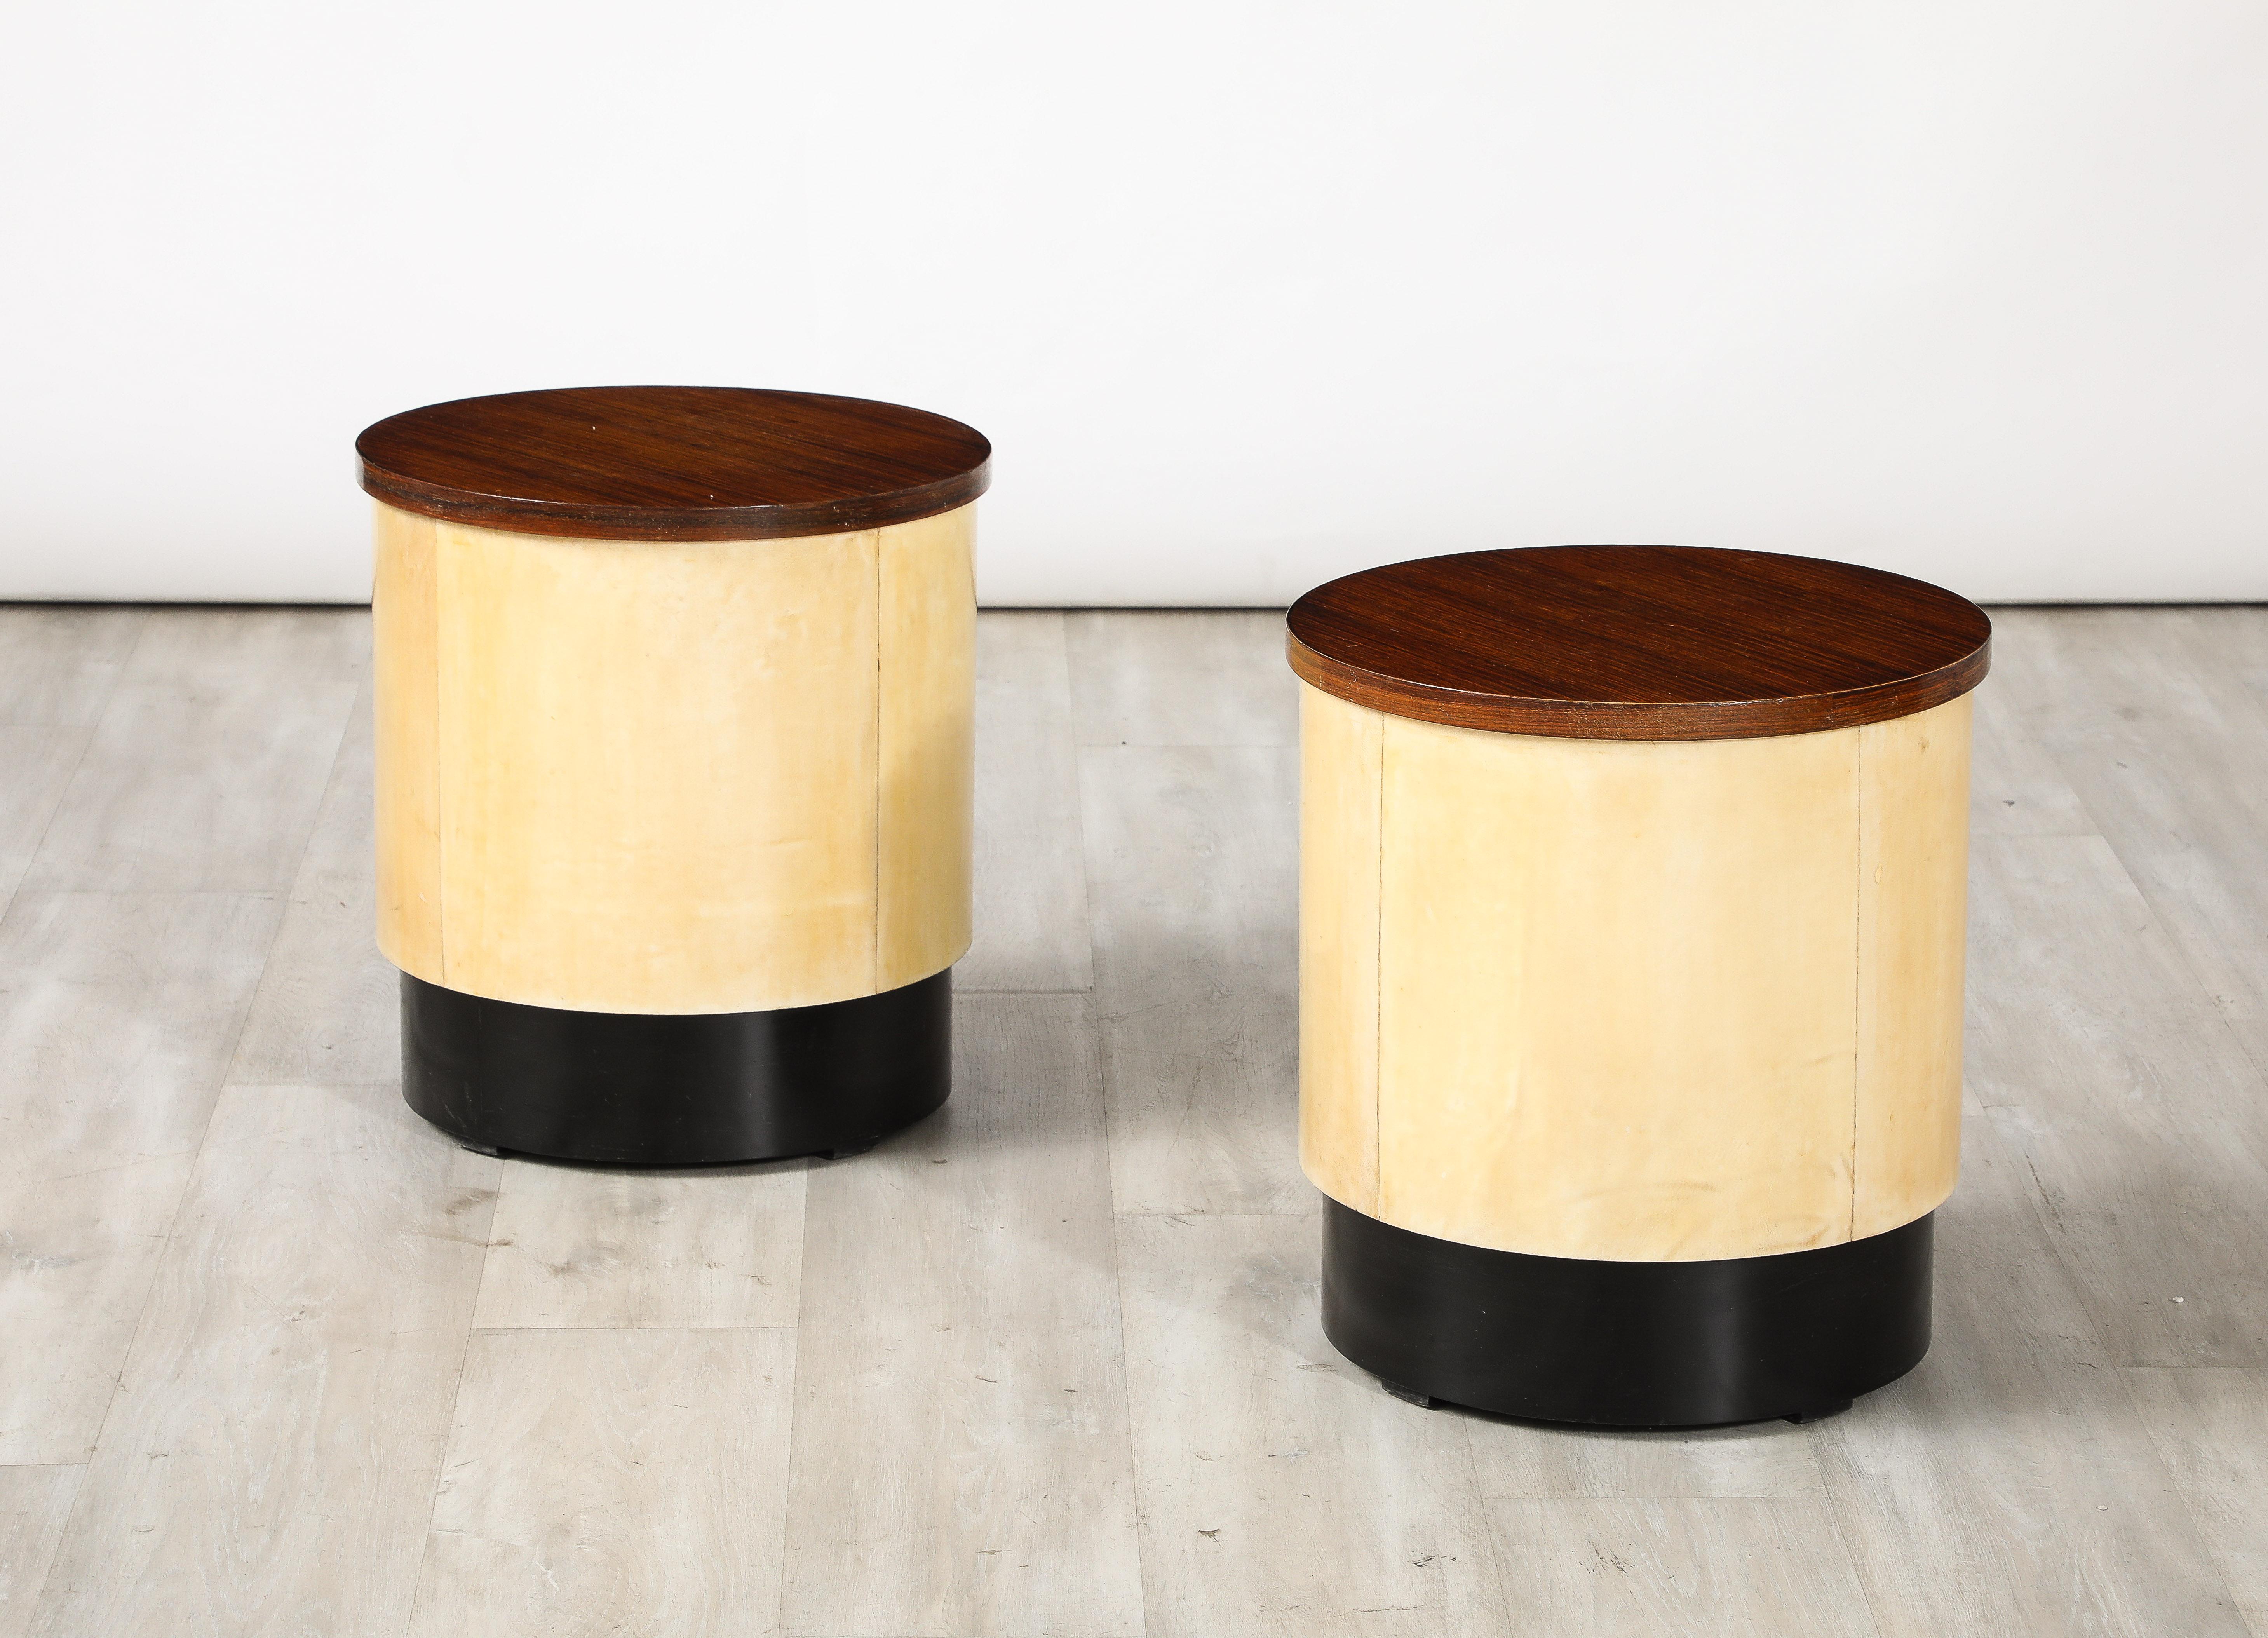 A pair of Italian Art Deco stools, the circular tops in palisander wood supported by rounded bases covered in vellum and the base surround in ebonized wood.  The combination of the exotic and rich palisander wood and warmth of the vellum make for a